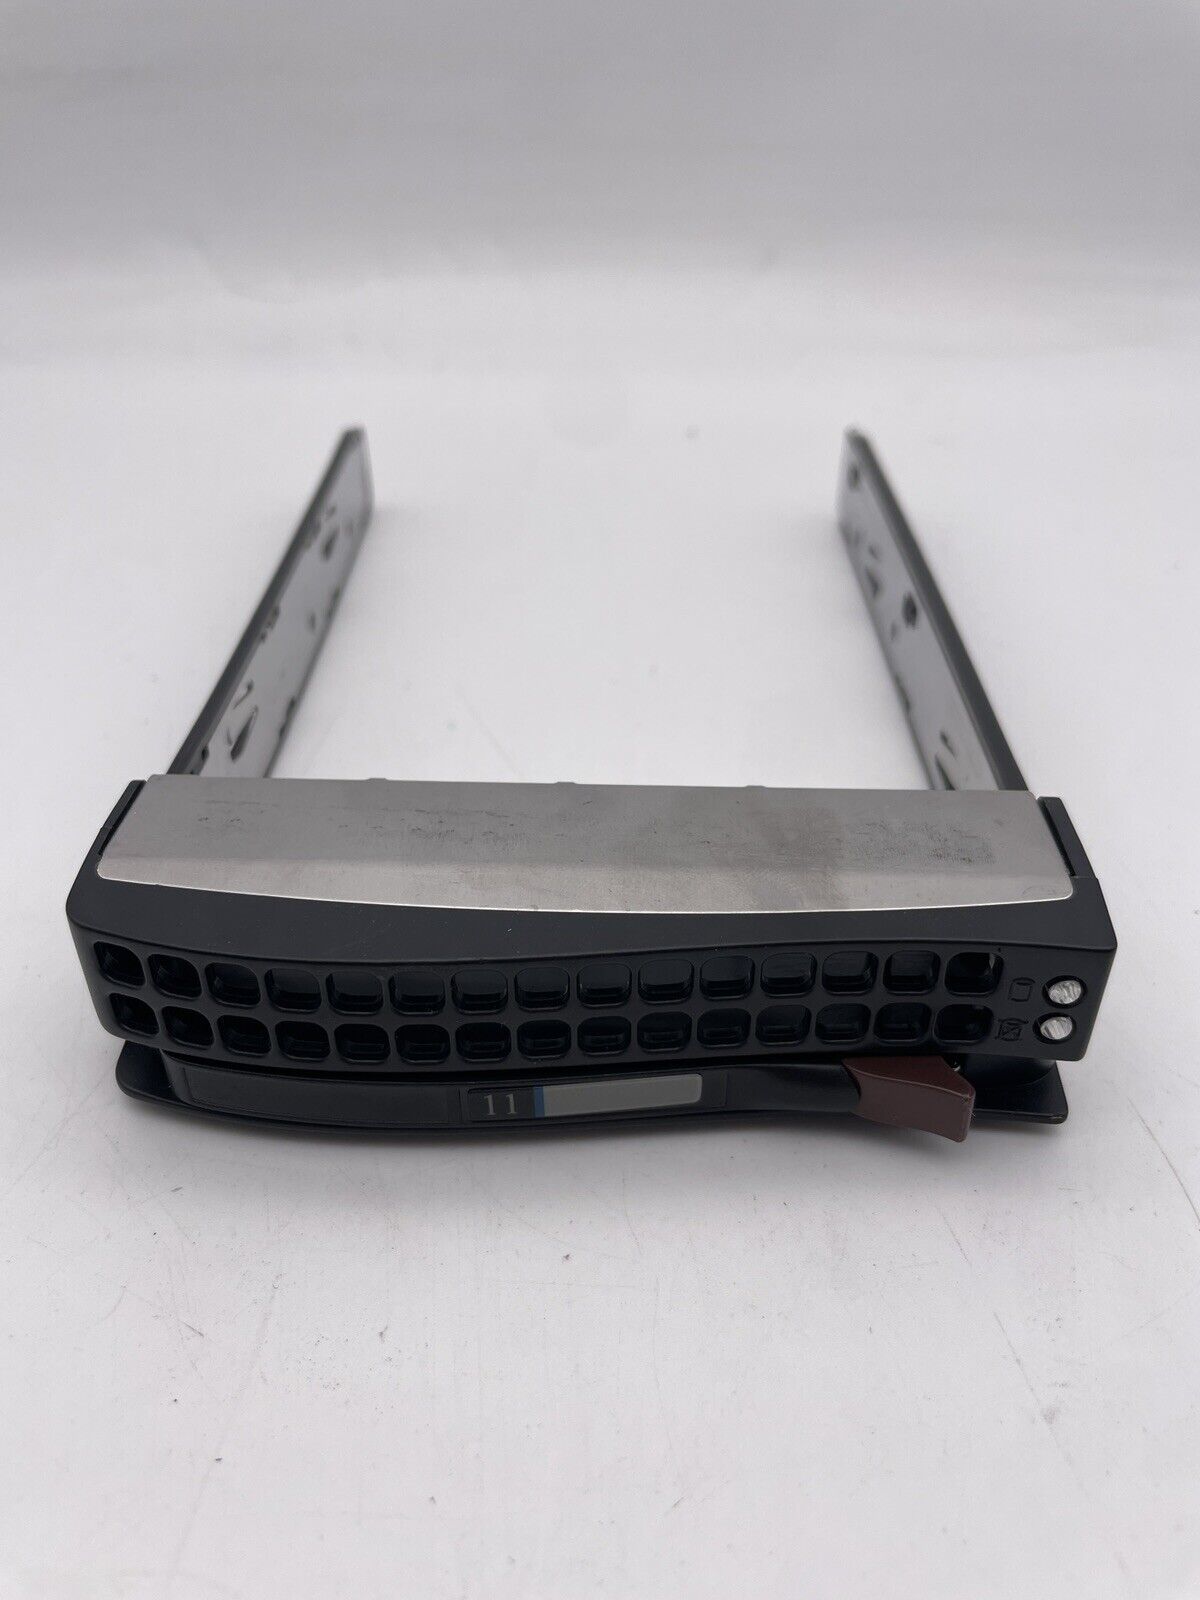 (Lot of 4) Supermicro Server Hard Drive Caddy Tray 3.5